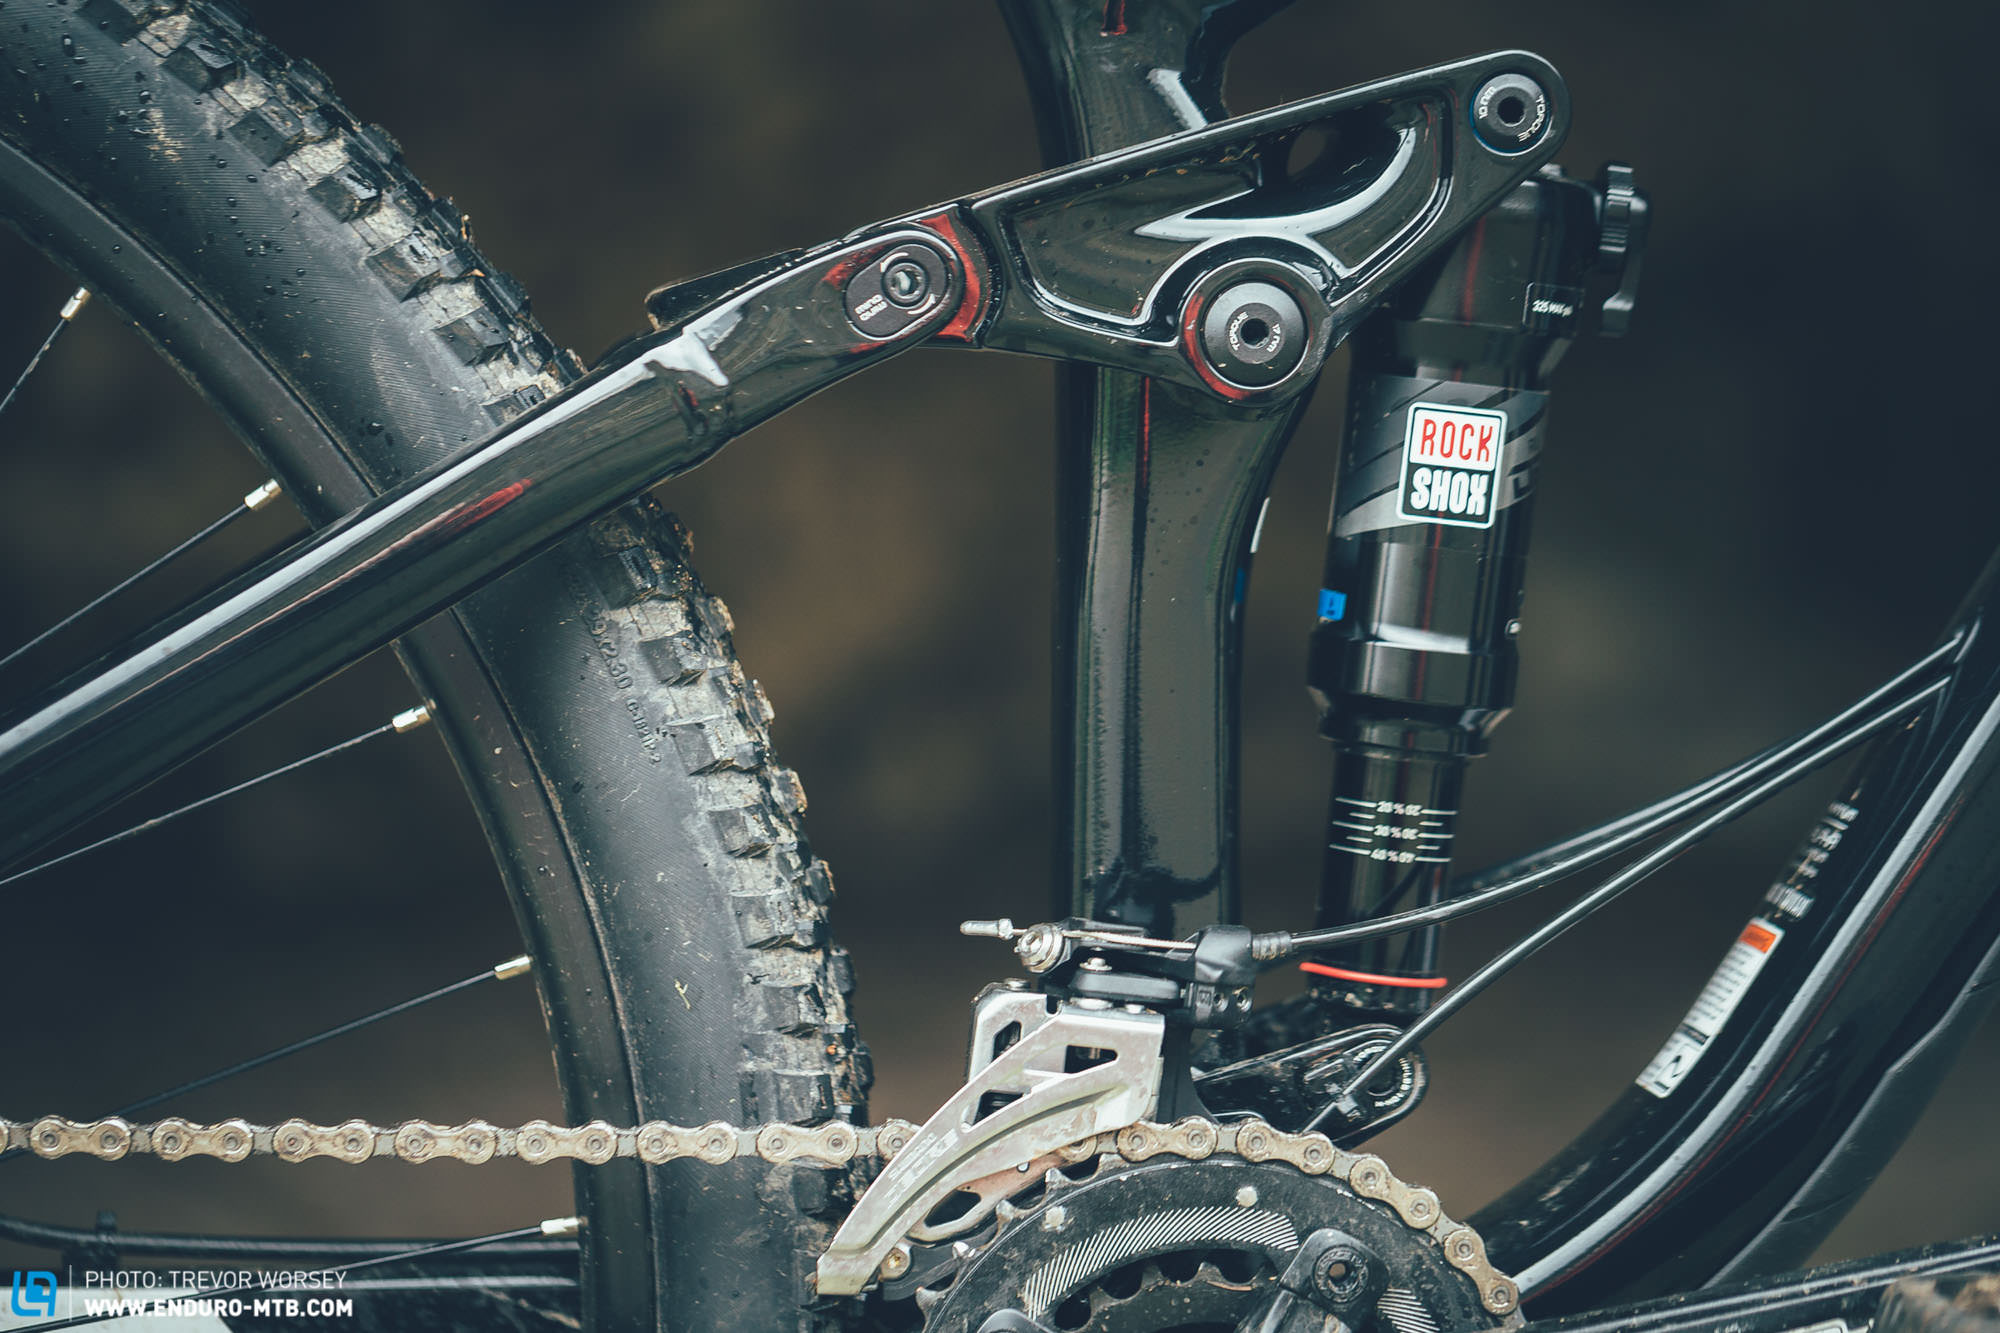 Trek’s Full Floater ABP suspension is class-leading. Active and supportive, it laughs at rocks and big impacts, keeping control while others have lost the plot.